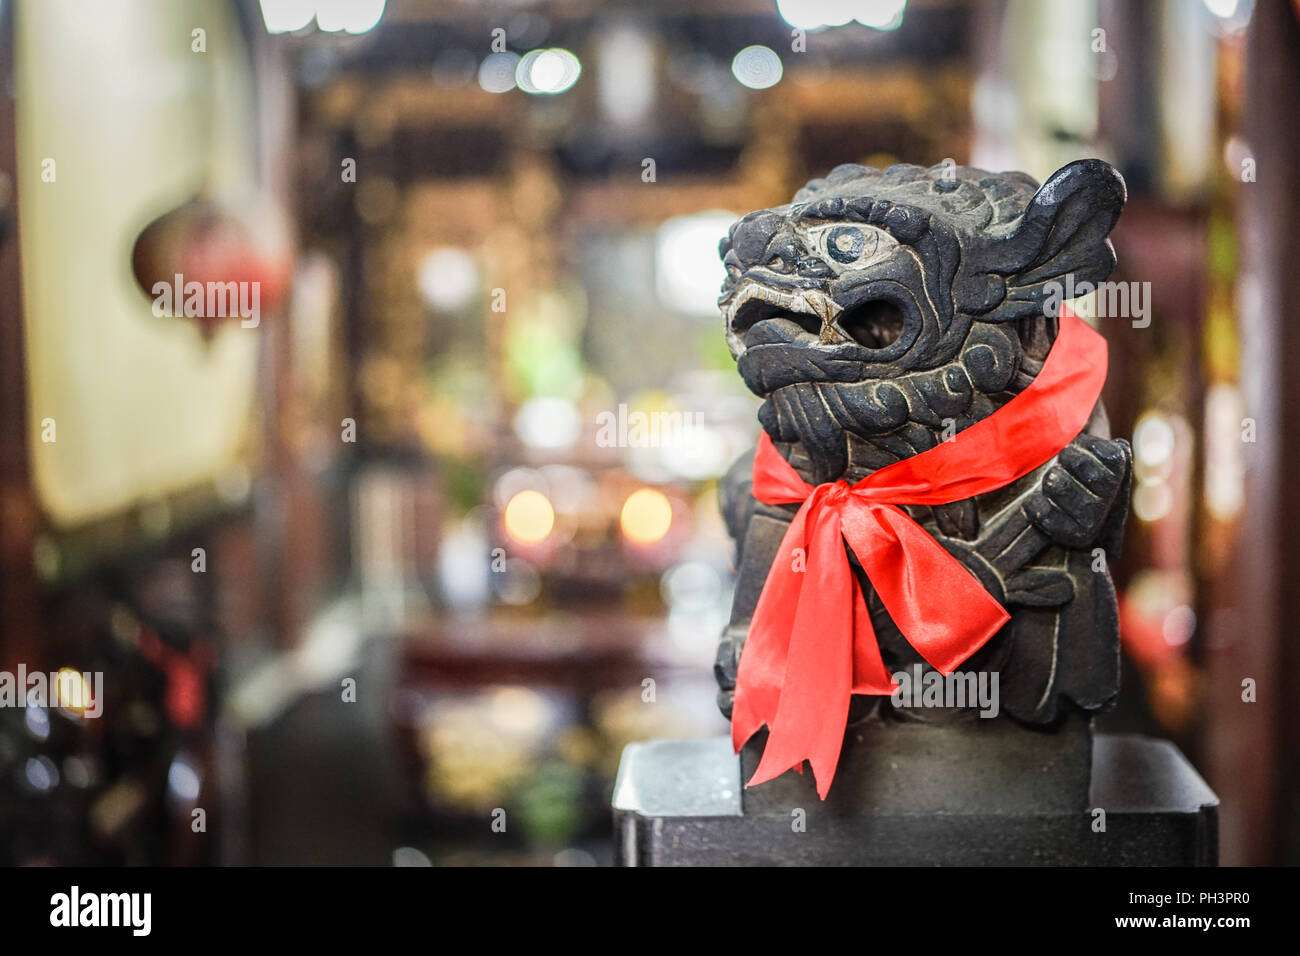 Smart black stone lion statue glance at the right side, red scarf and blur background Stock Photo